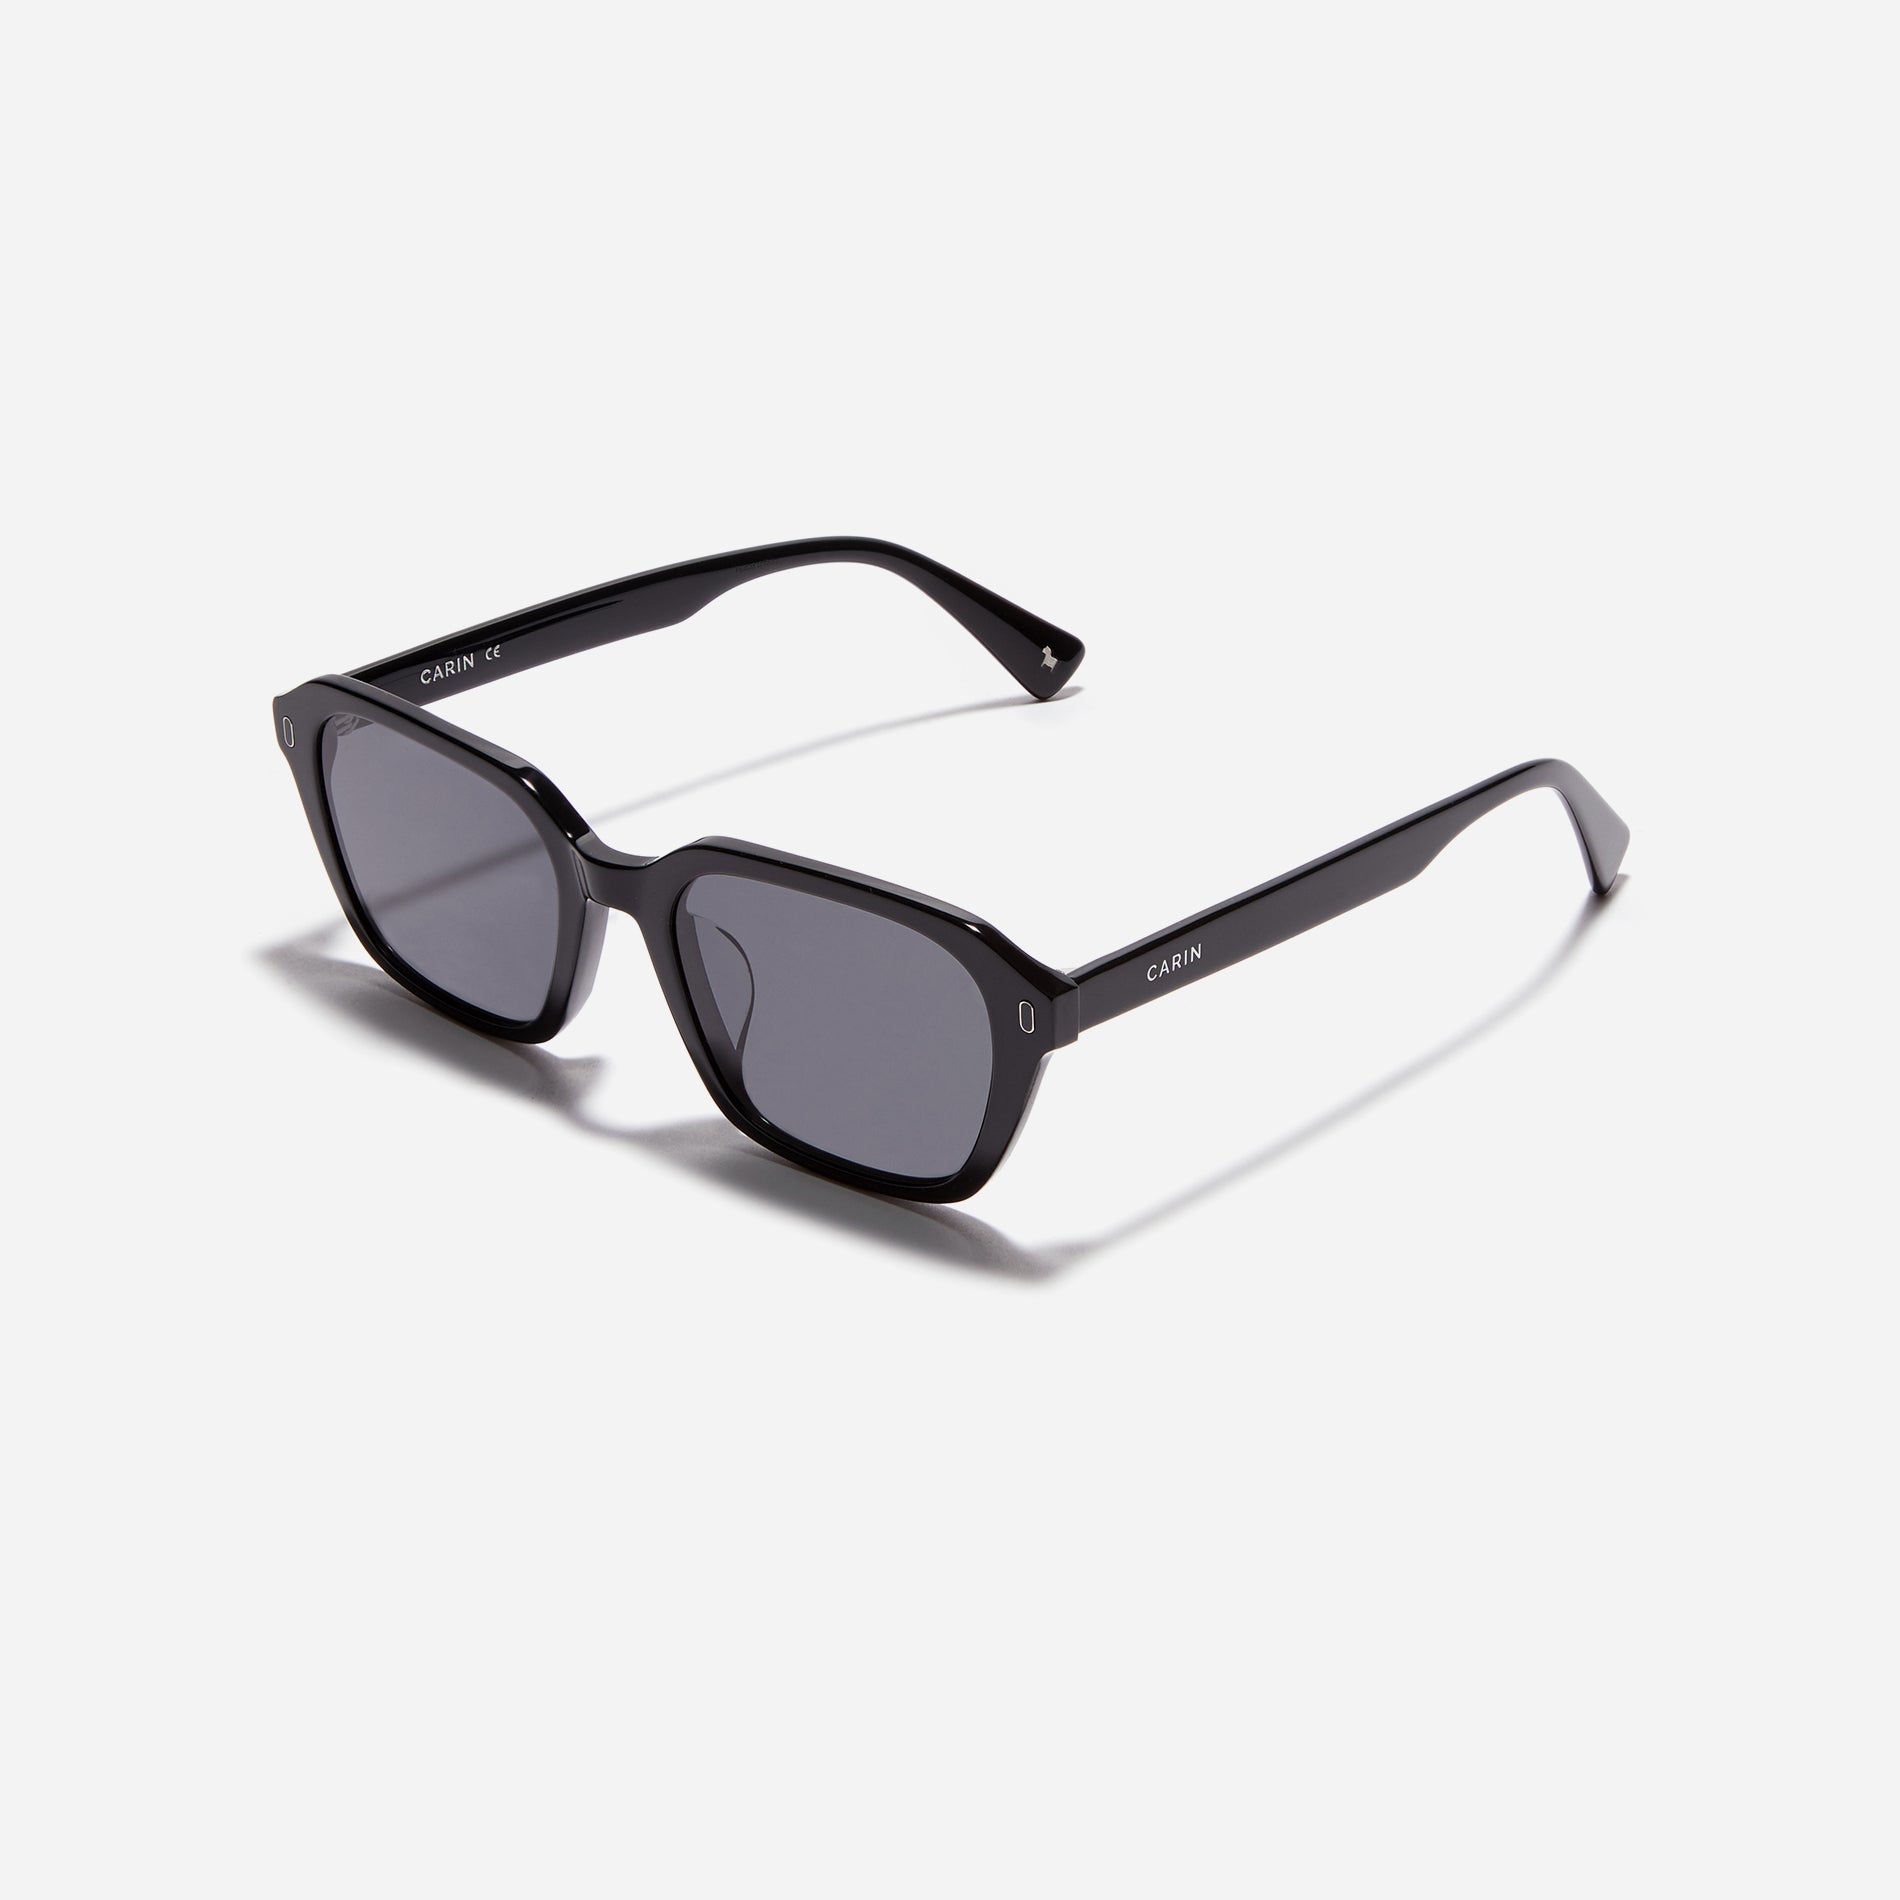 Square-shaped petite frame sunglasses accentuated with retro color details and a sleek narrow rim style. 